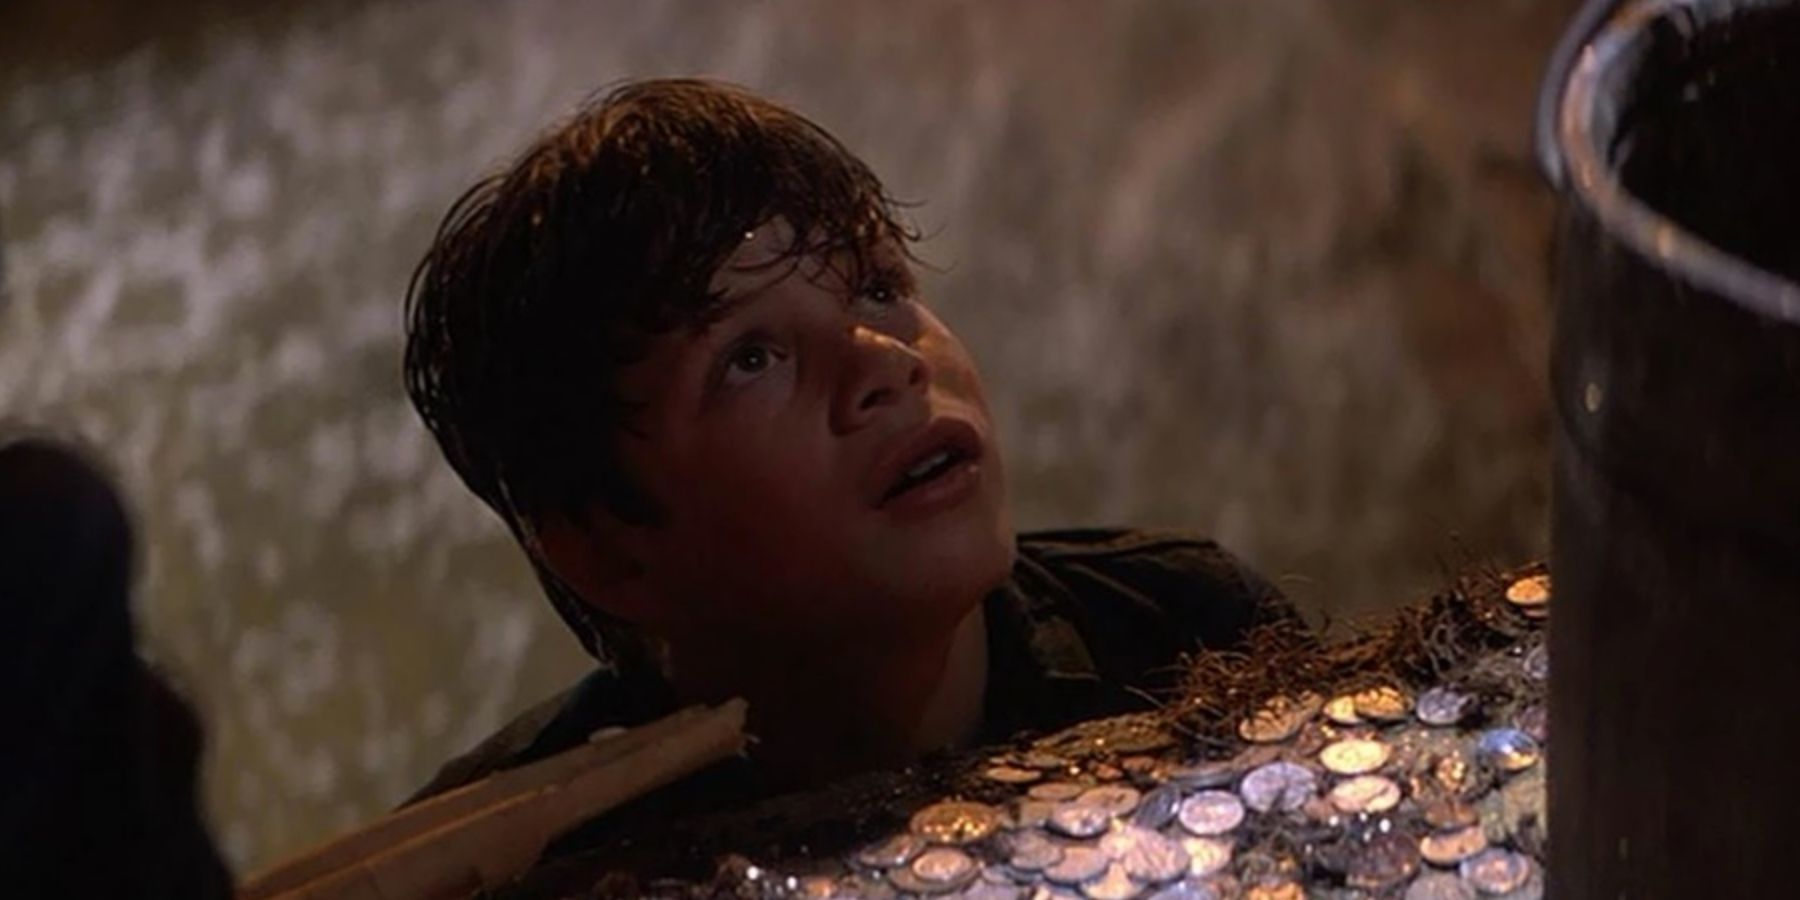 Mikey gives his speech in the well in The Goonies